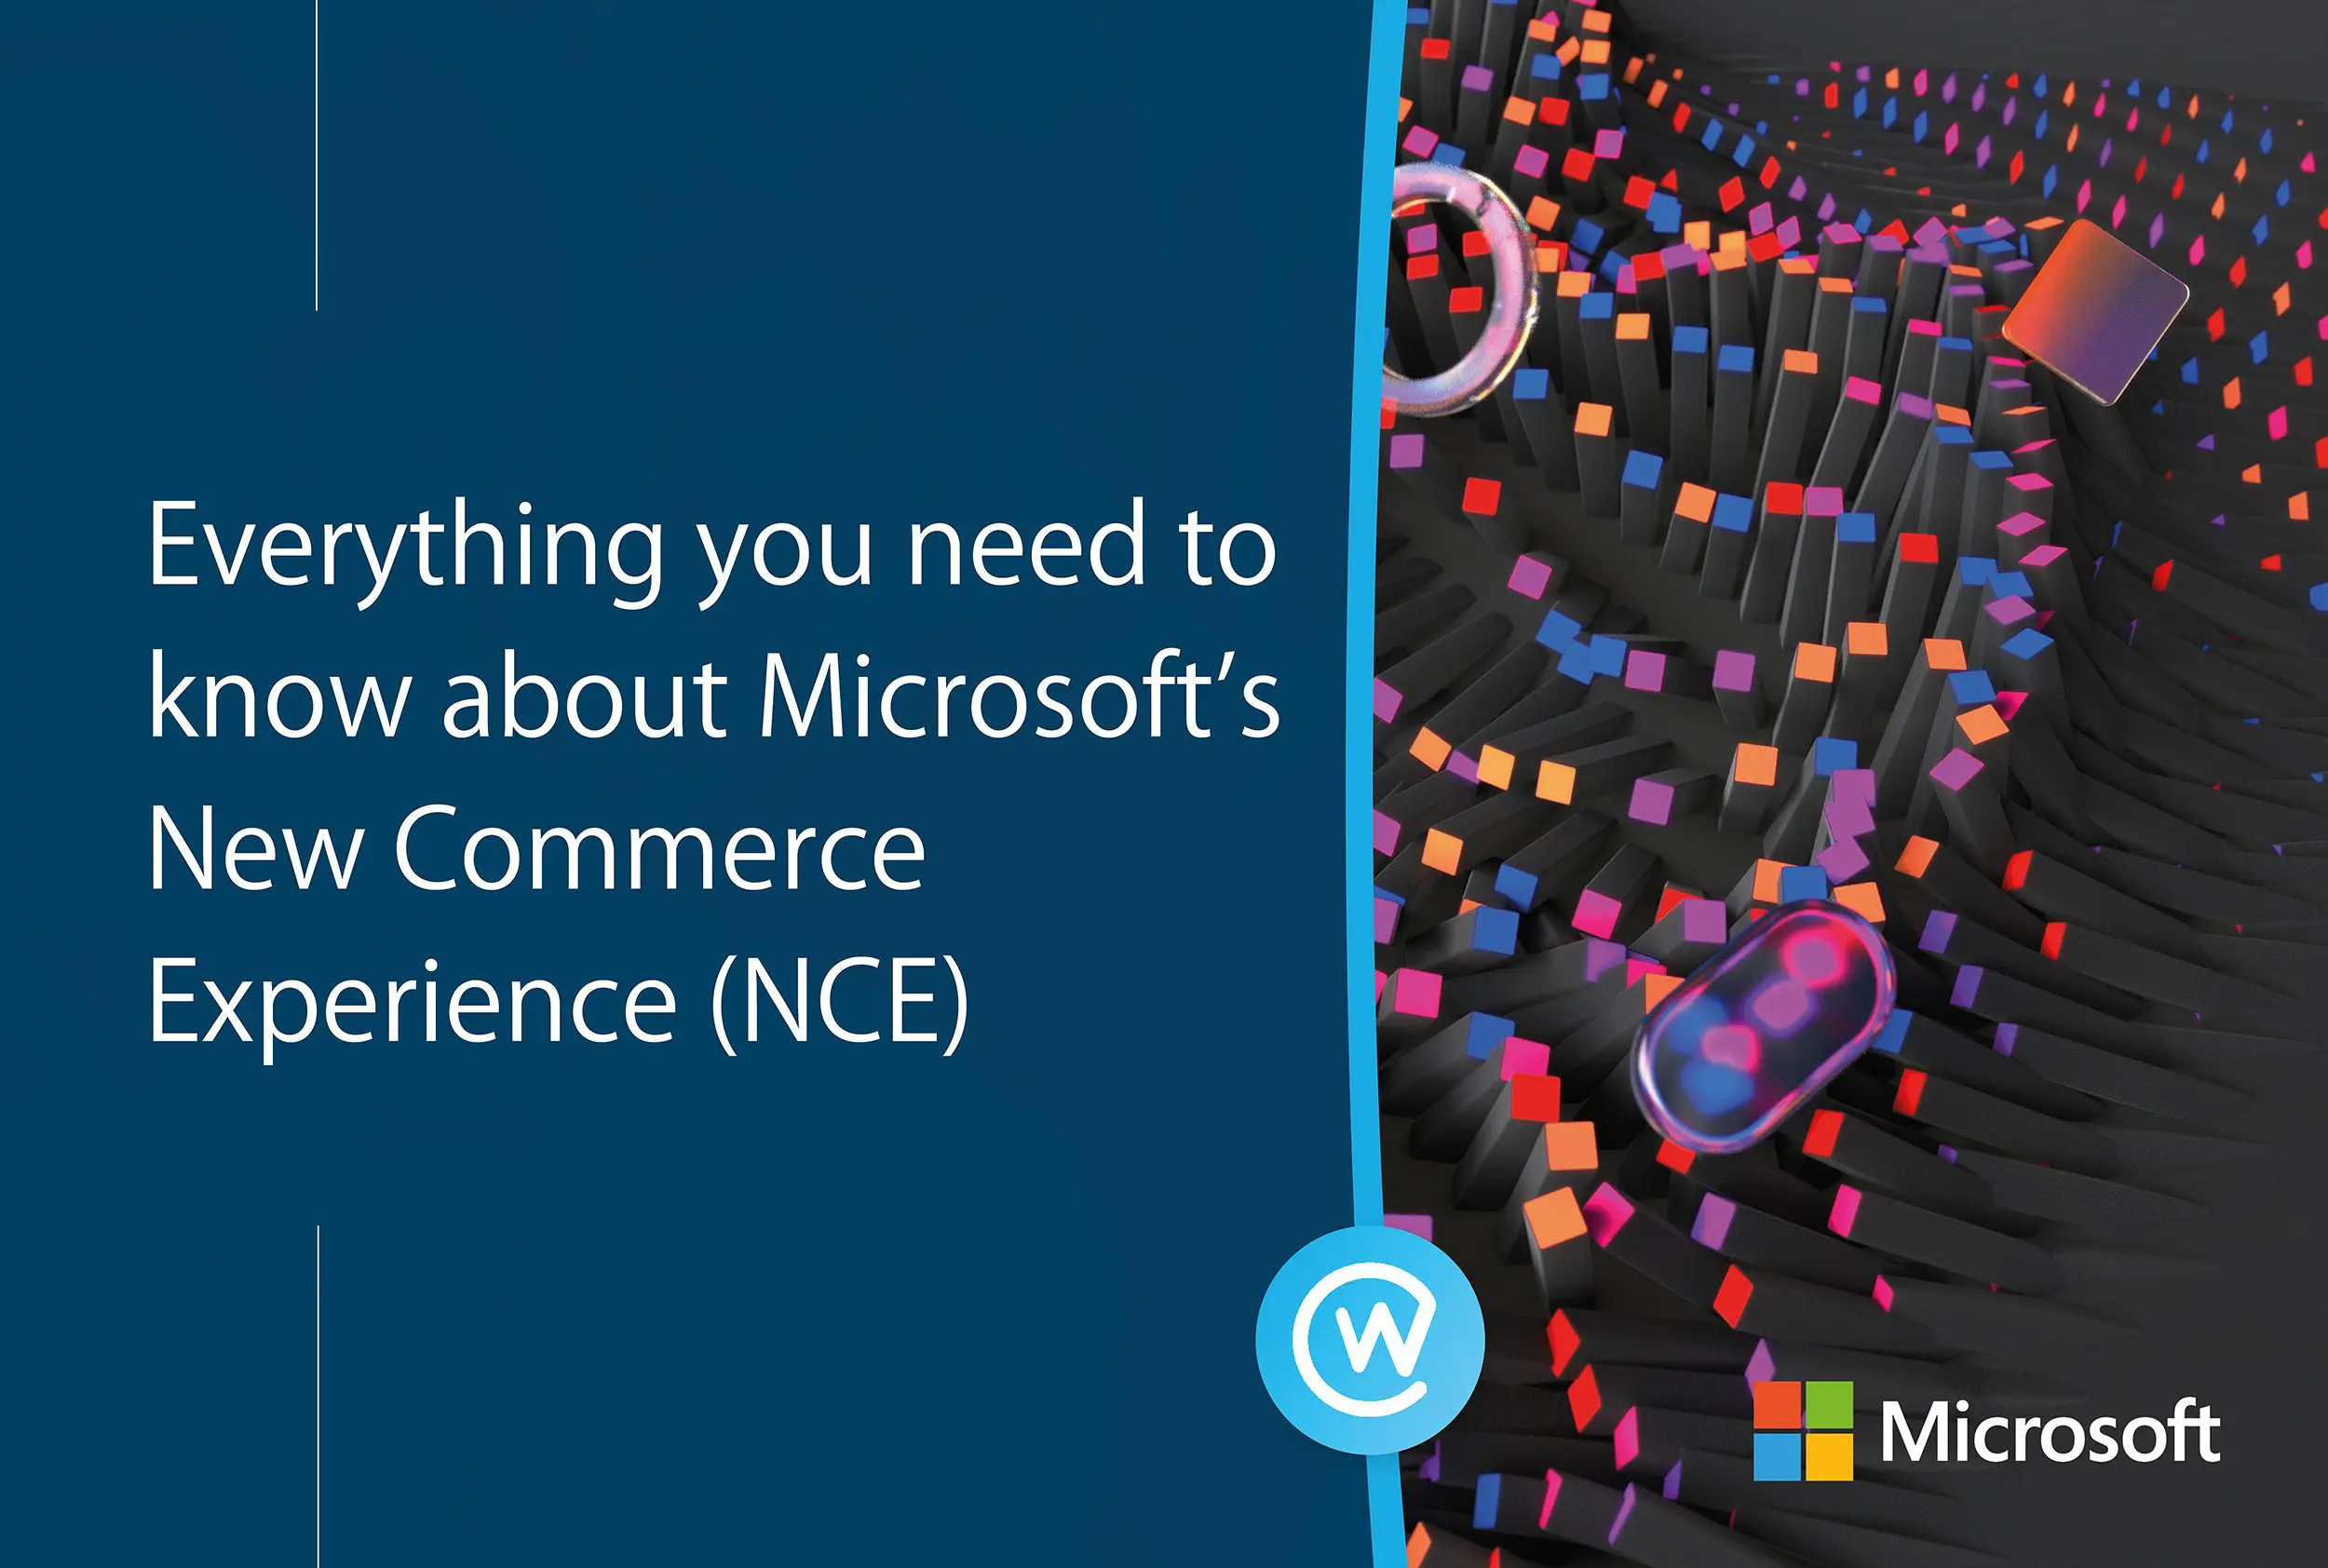 Microsoft’s New Commerce Experience (NCE) – Everything you need to know